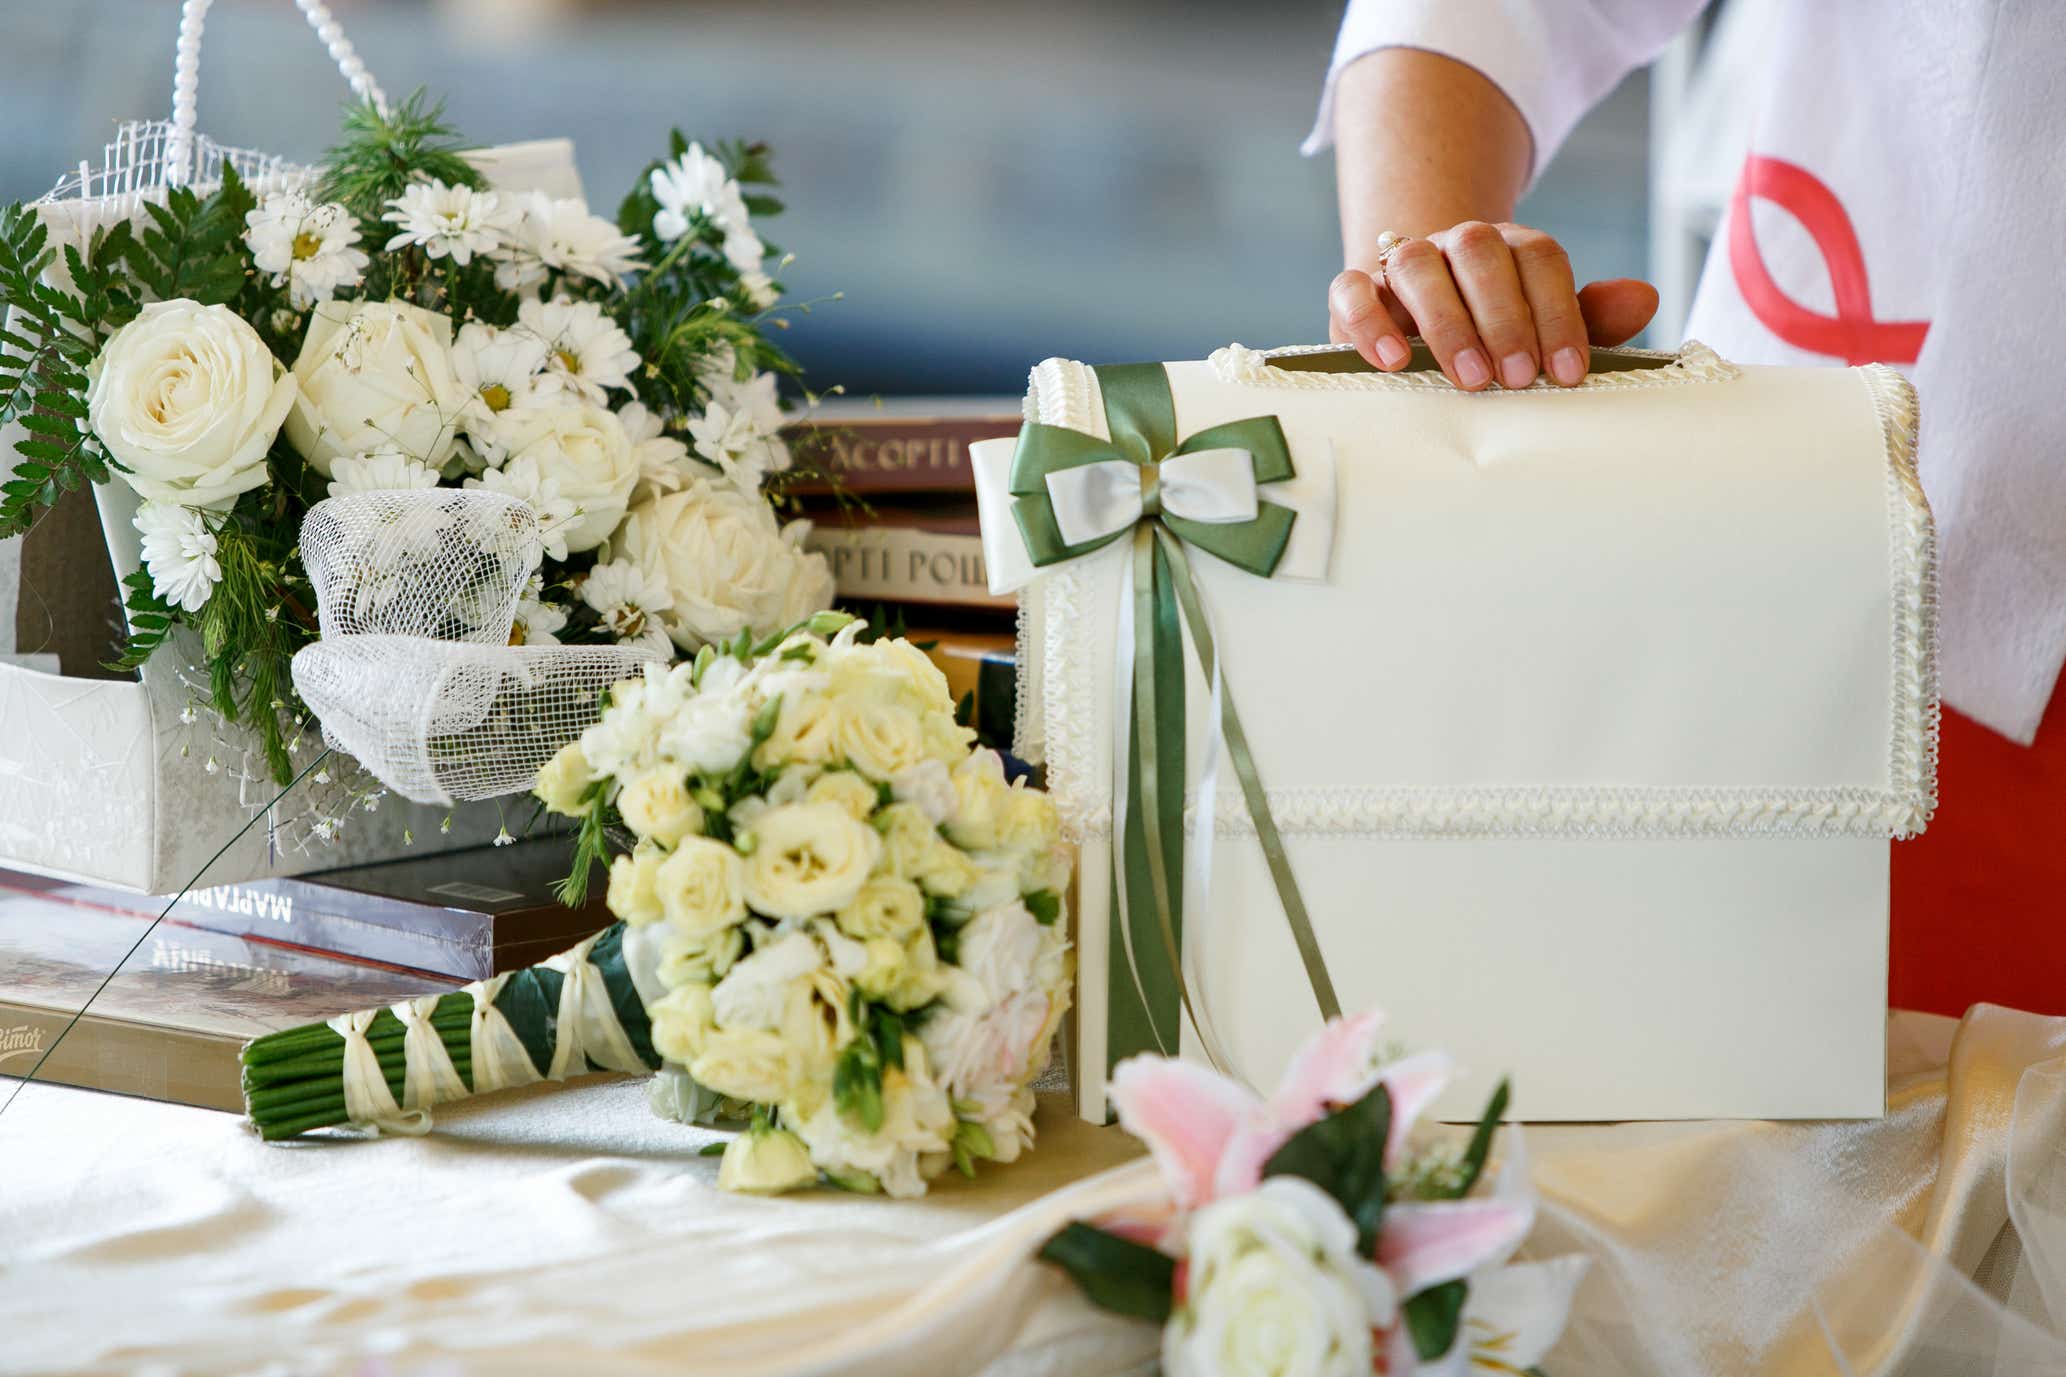 How much should you spend on a wedding gift? money.co.uk